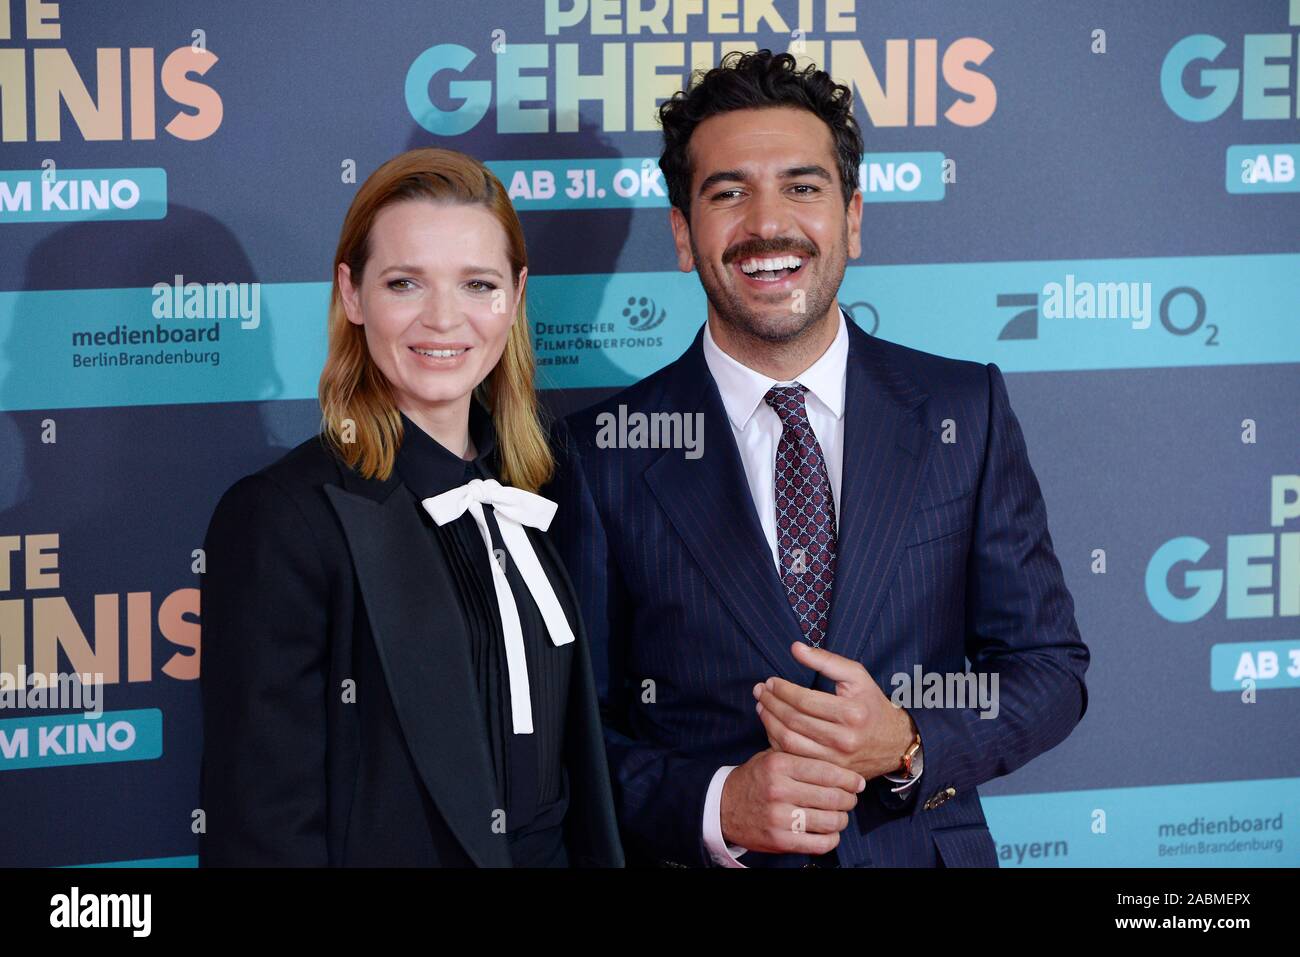 The actors Karoline Herfurth and Elias M´Barek at the premiere of the movie 'Das perfekte Geheimnis' at the Mathäser Kino in Munich. [automated translation] Stock Photo